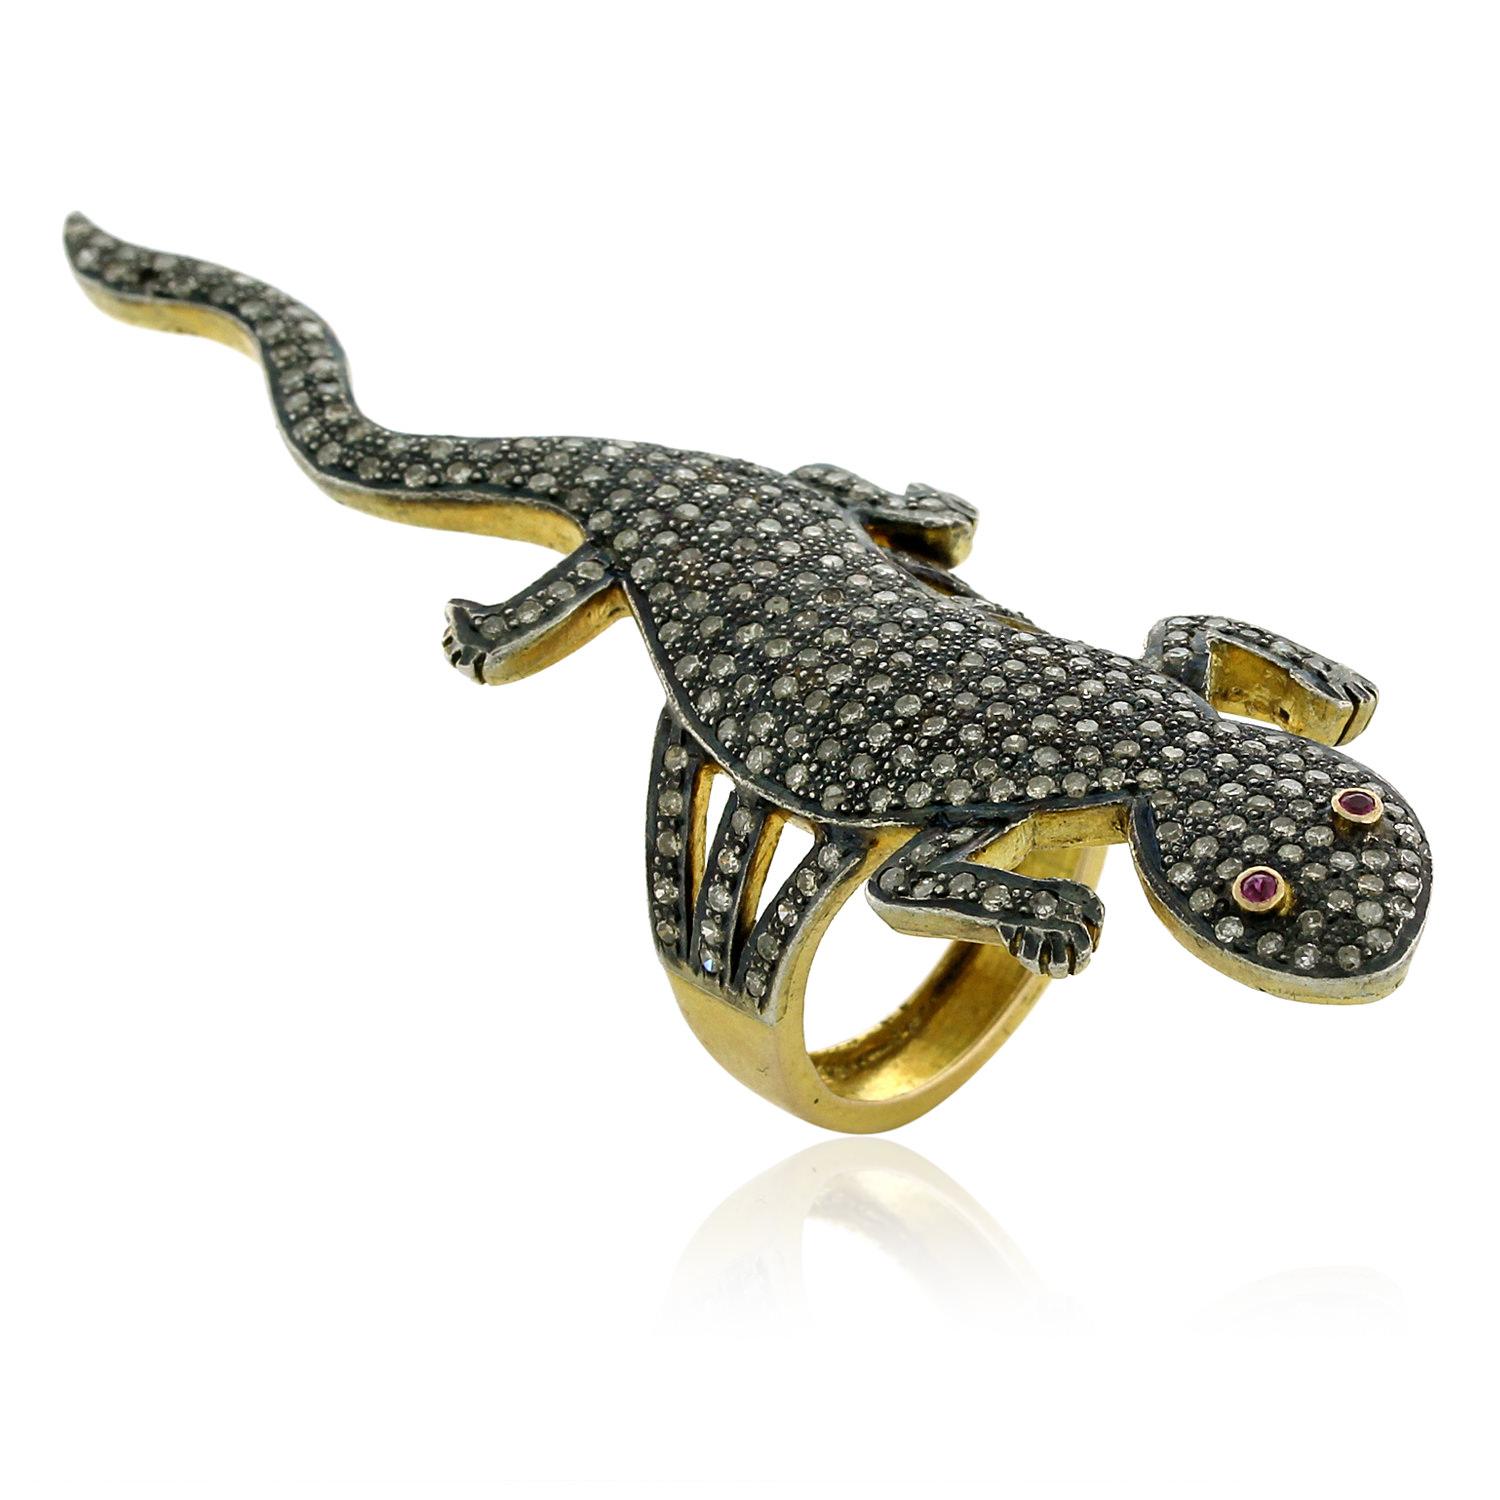 Lizard Shaped Pave Diamond Ring With Ruby Eyes Made In 14k Yellow Gold & Silver In New Condition For Sale In New York, NY